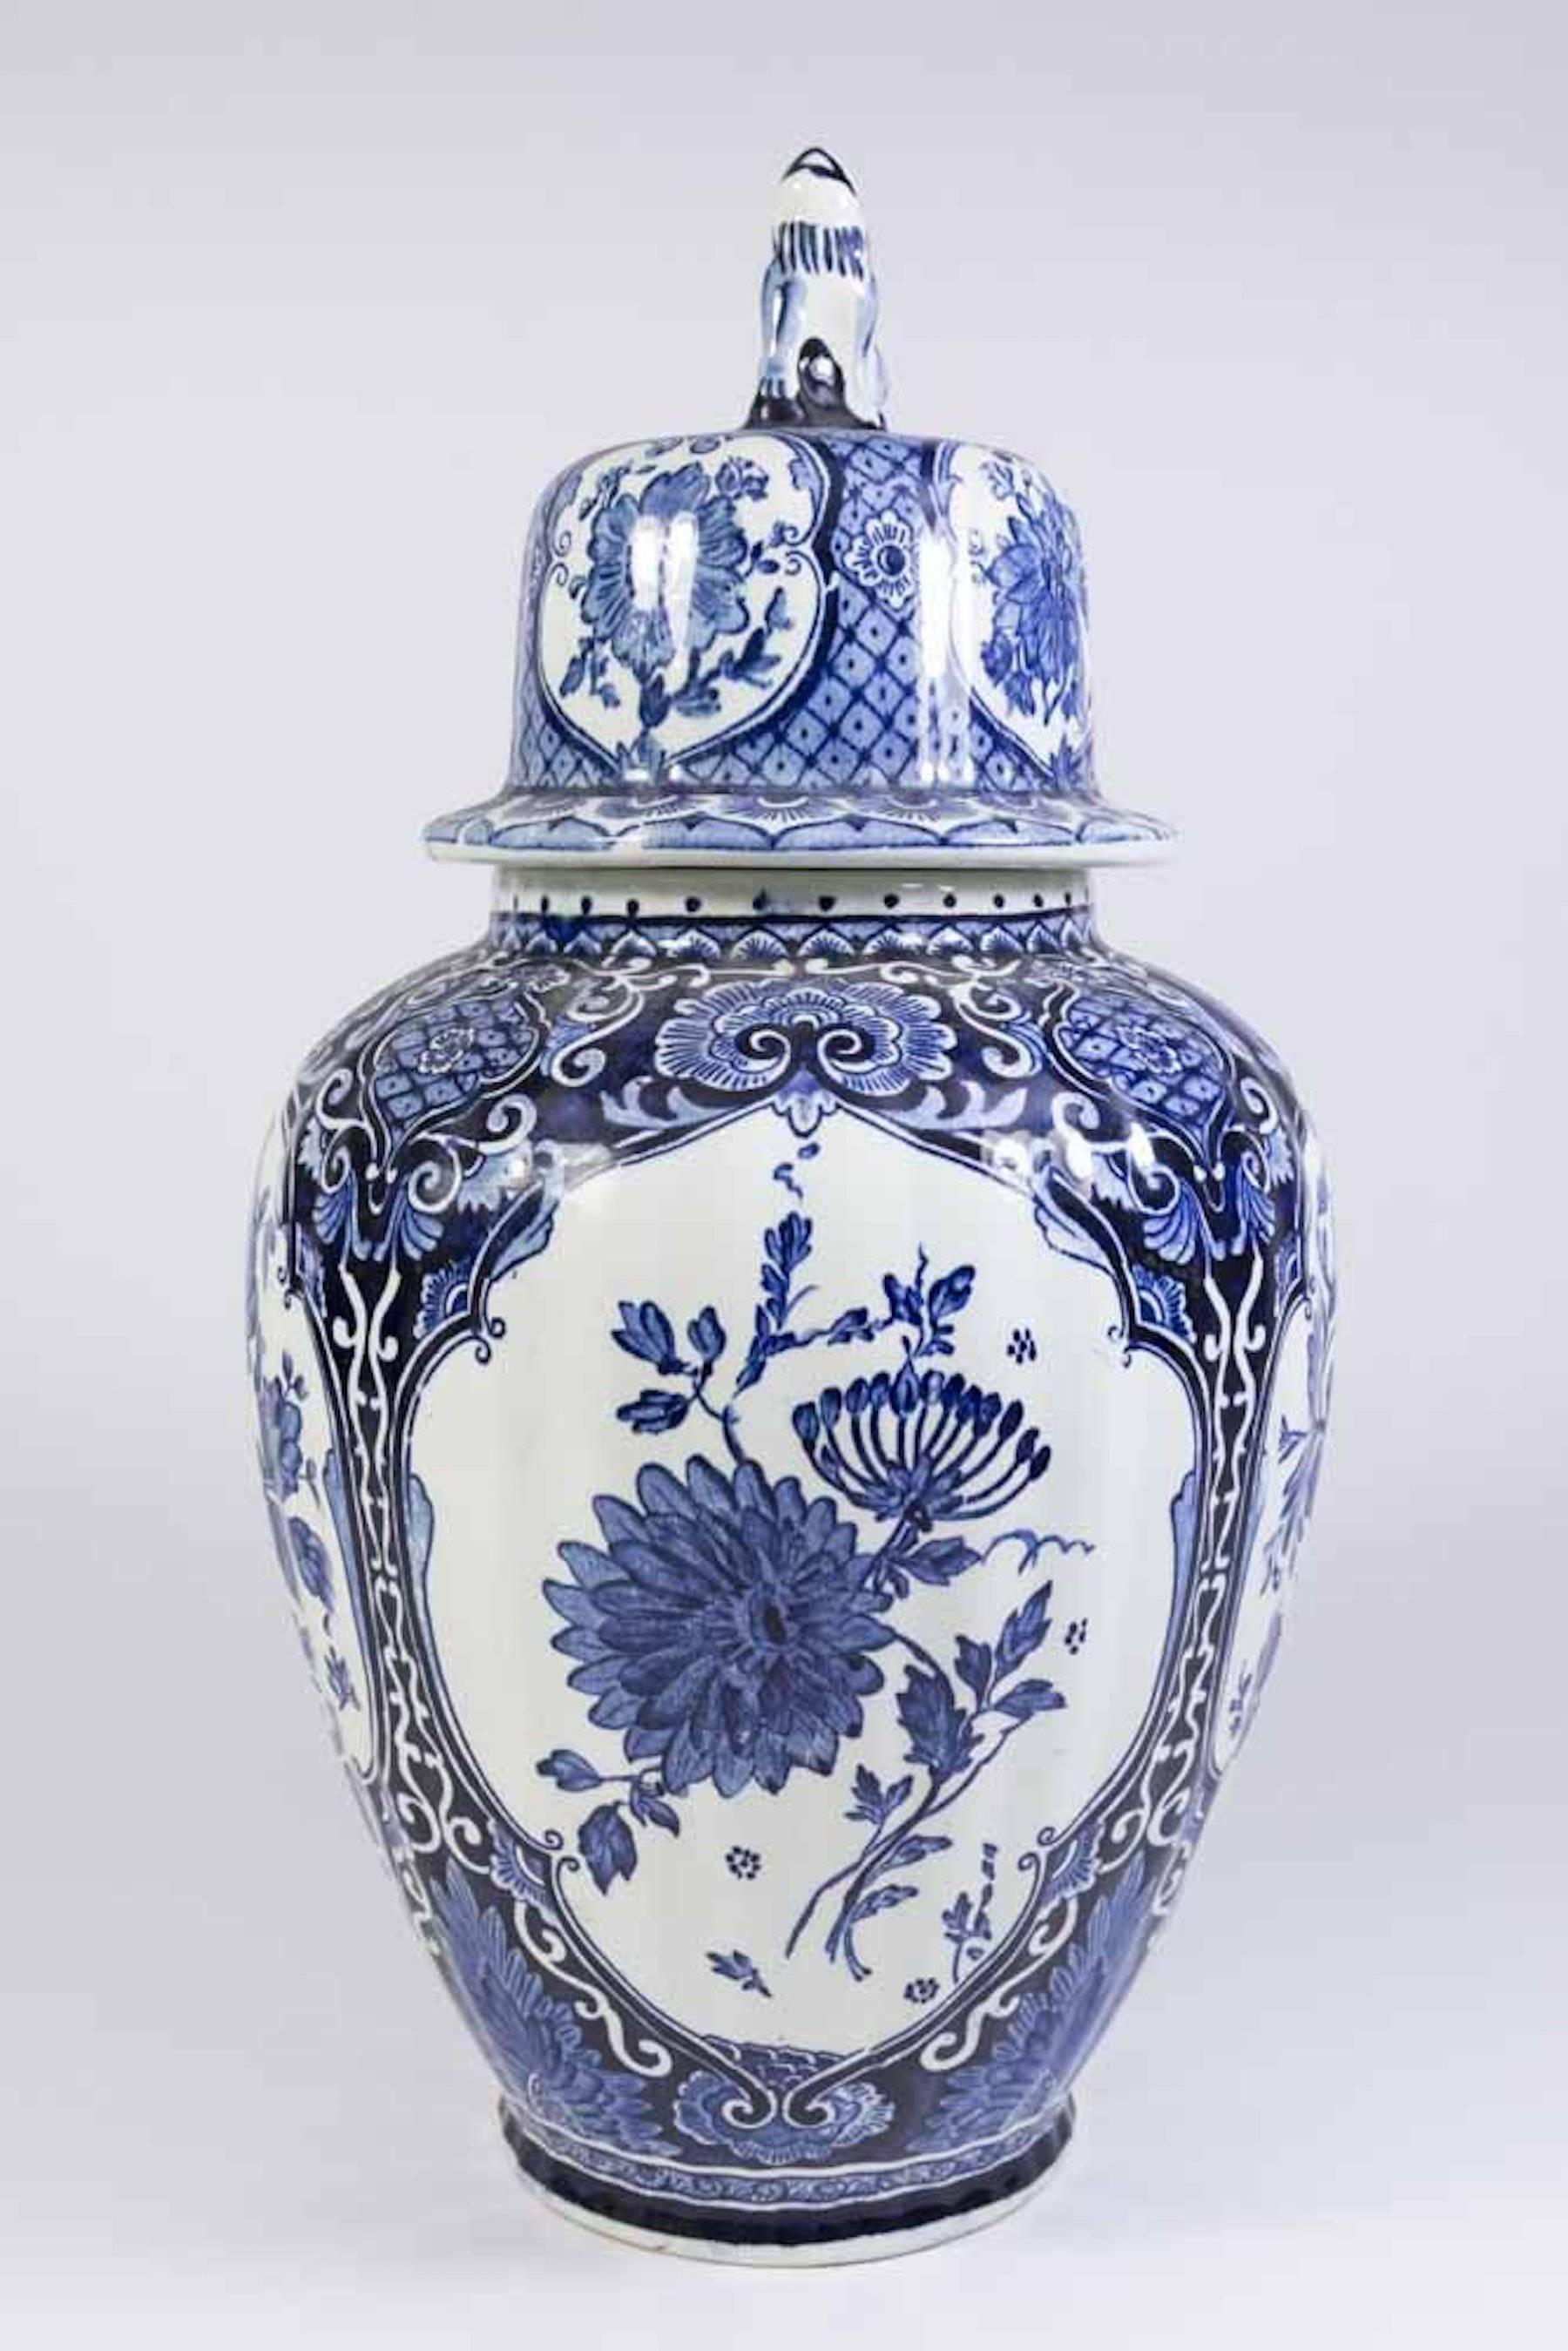 Pair of Delft style ginger jars, each one of typical form and decoration with foo dog finials.